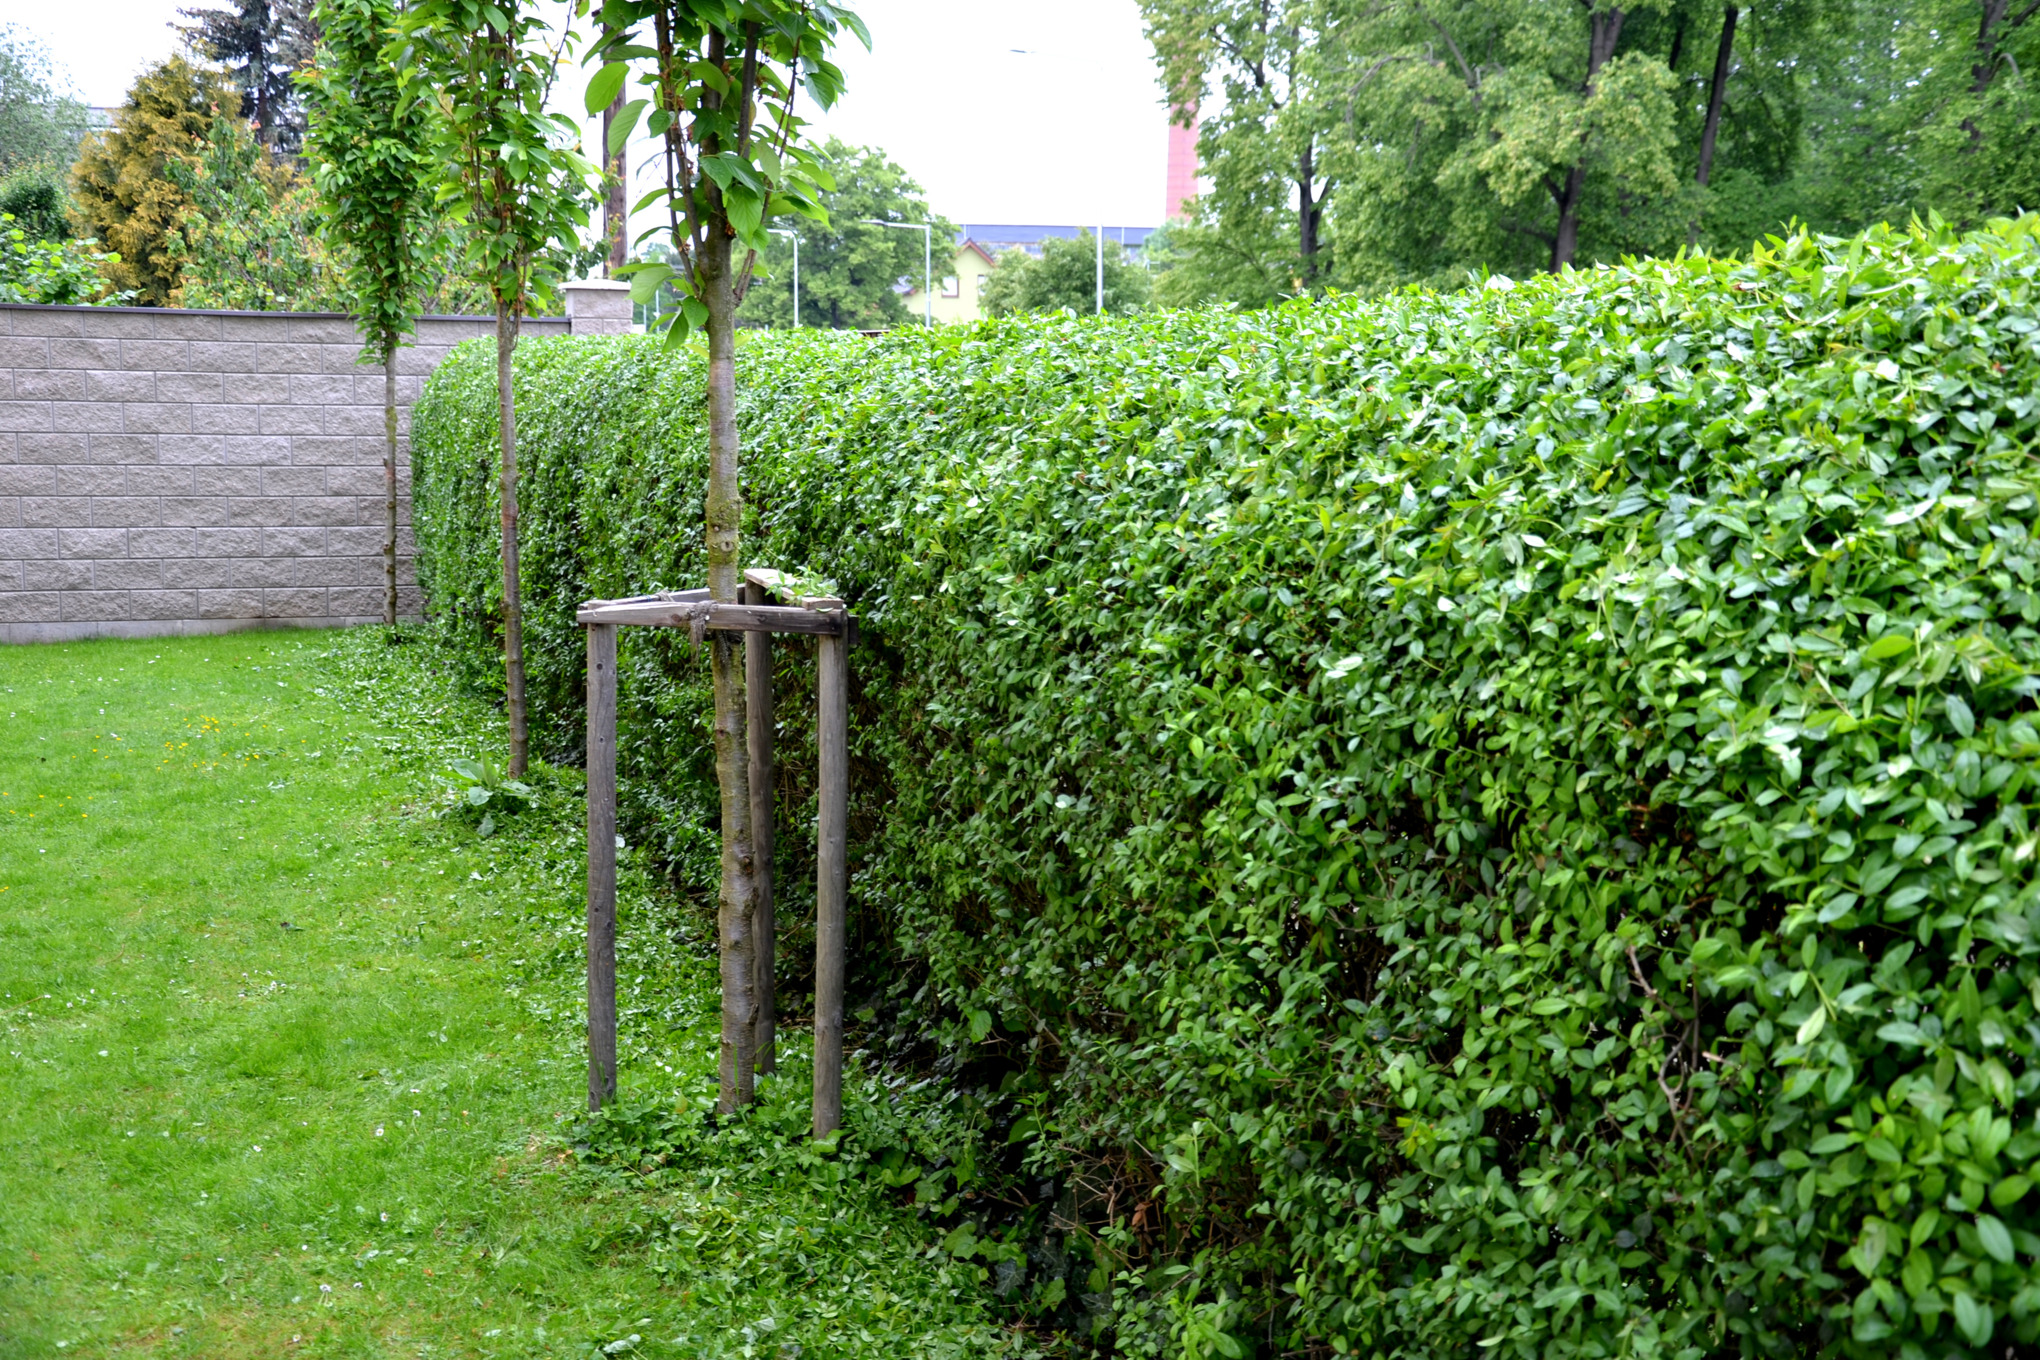 Privet hedge on a garden plot with lawn and small trees